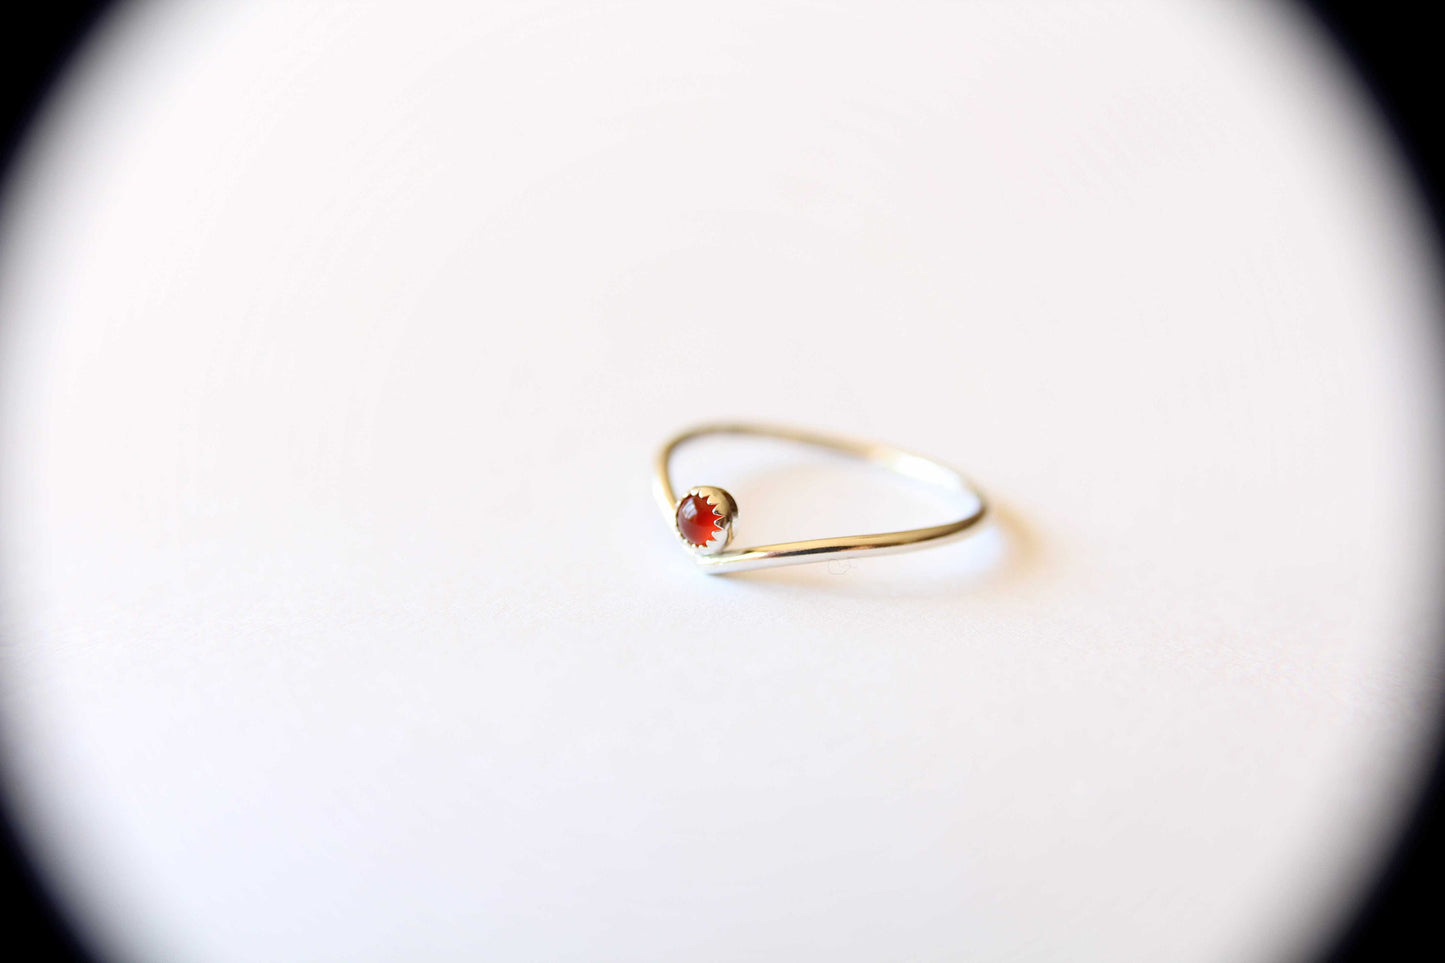 Chevron Ring, Stackable Ring, Birthstone Ring, Dainty Gemstone Ring, Minimalist Stackable Sterling Silver Birthstone Ring, Carnelian, Gift